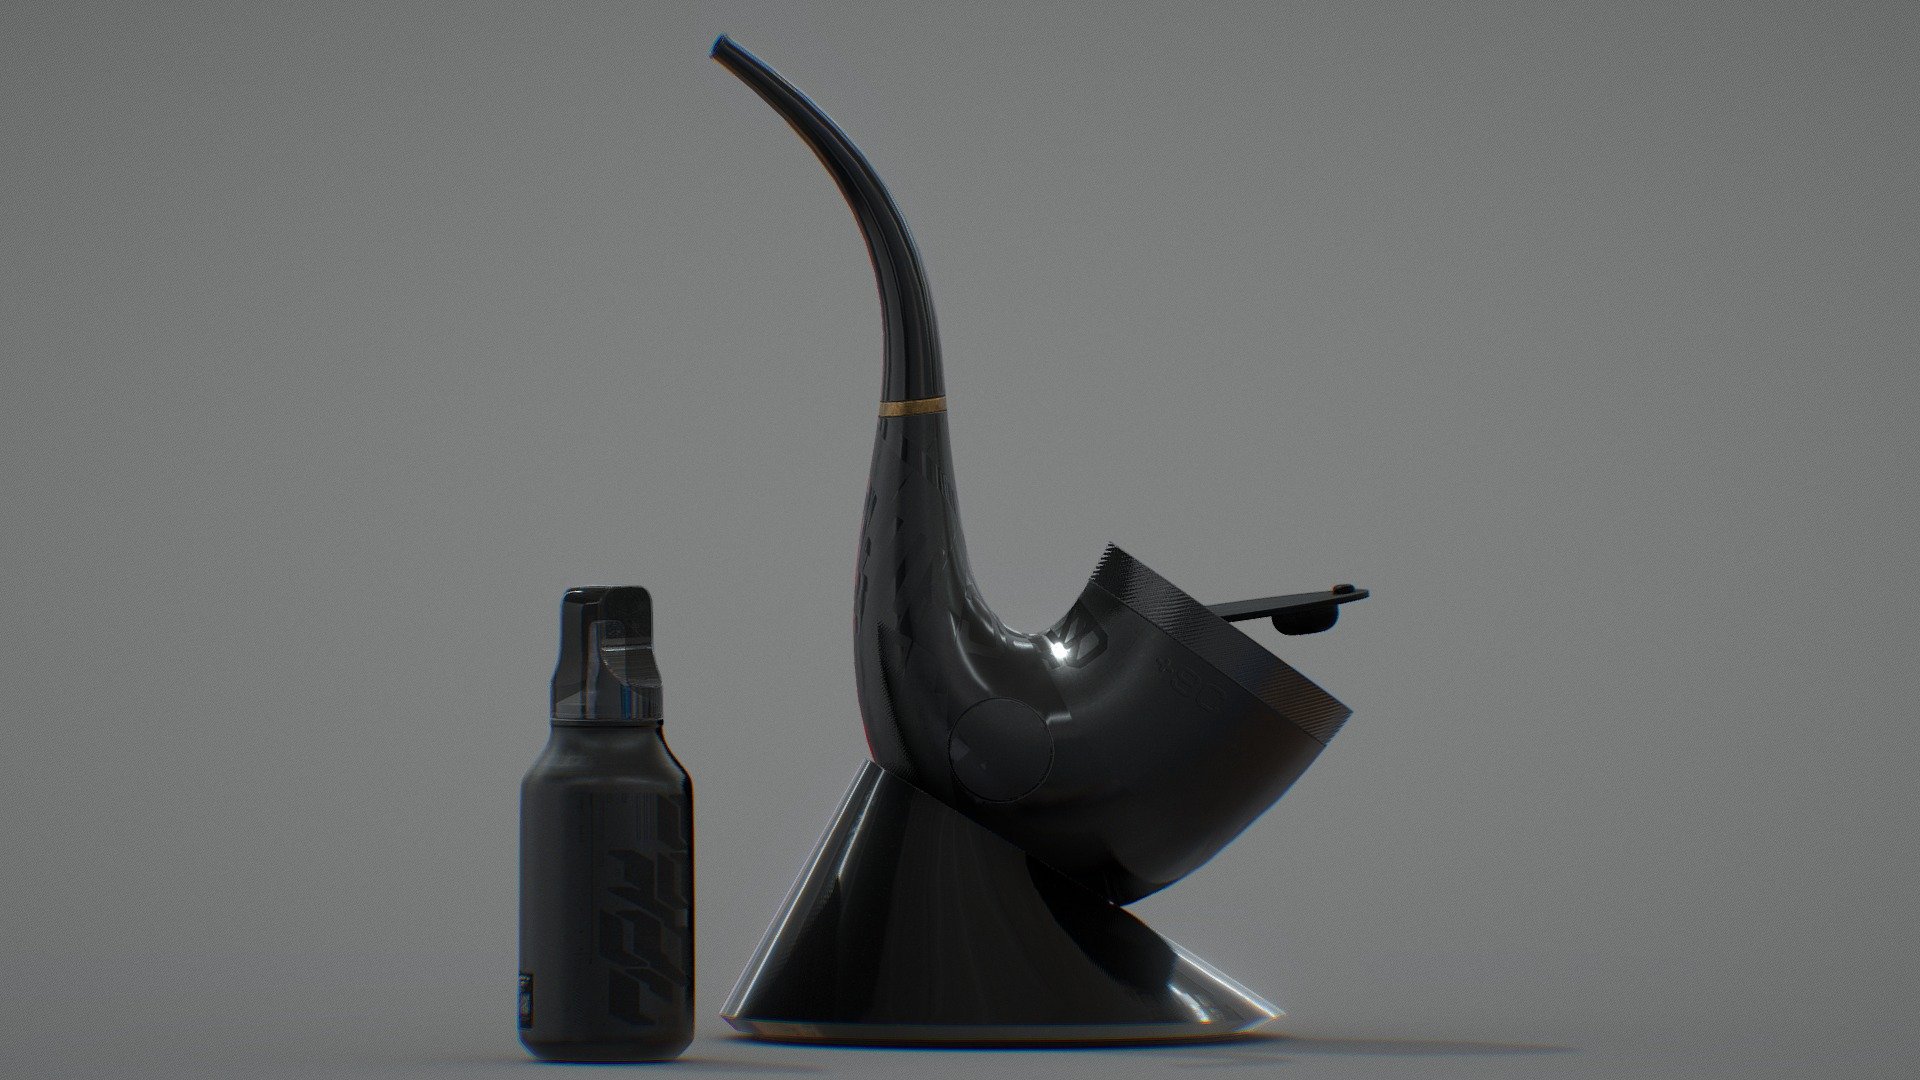 Drag and Drop and you are good to go. 4K textures 2 materials. One for each object. 

On the quest to incorpore more nurbs modeling to my workflow. 

Check my profile for free models https://sketchfab.com/re1monsen If you enjoy my work please consider supporting me I have many affordable models in the shop. Smash that follow! 

Feel free to contact me. I’d love yo hear from you.

Thanks! - "Silhouette" a Smoking Pipe - Download Free 3D model by re1monsen 3d model